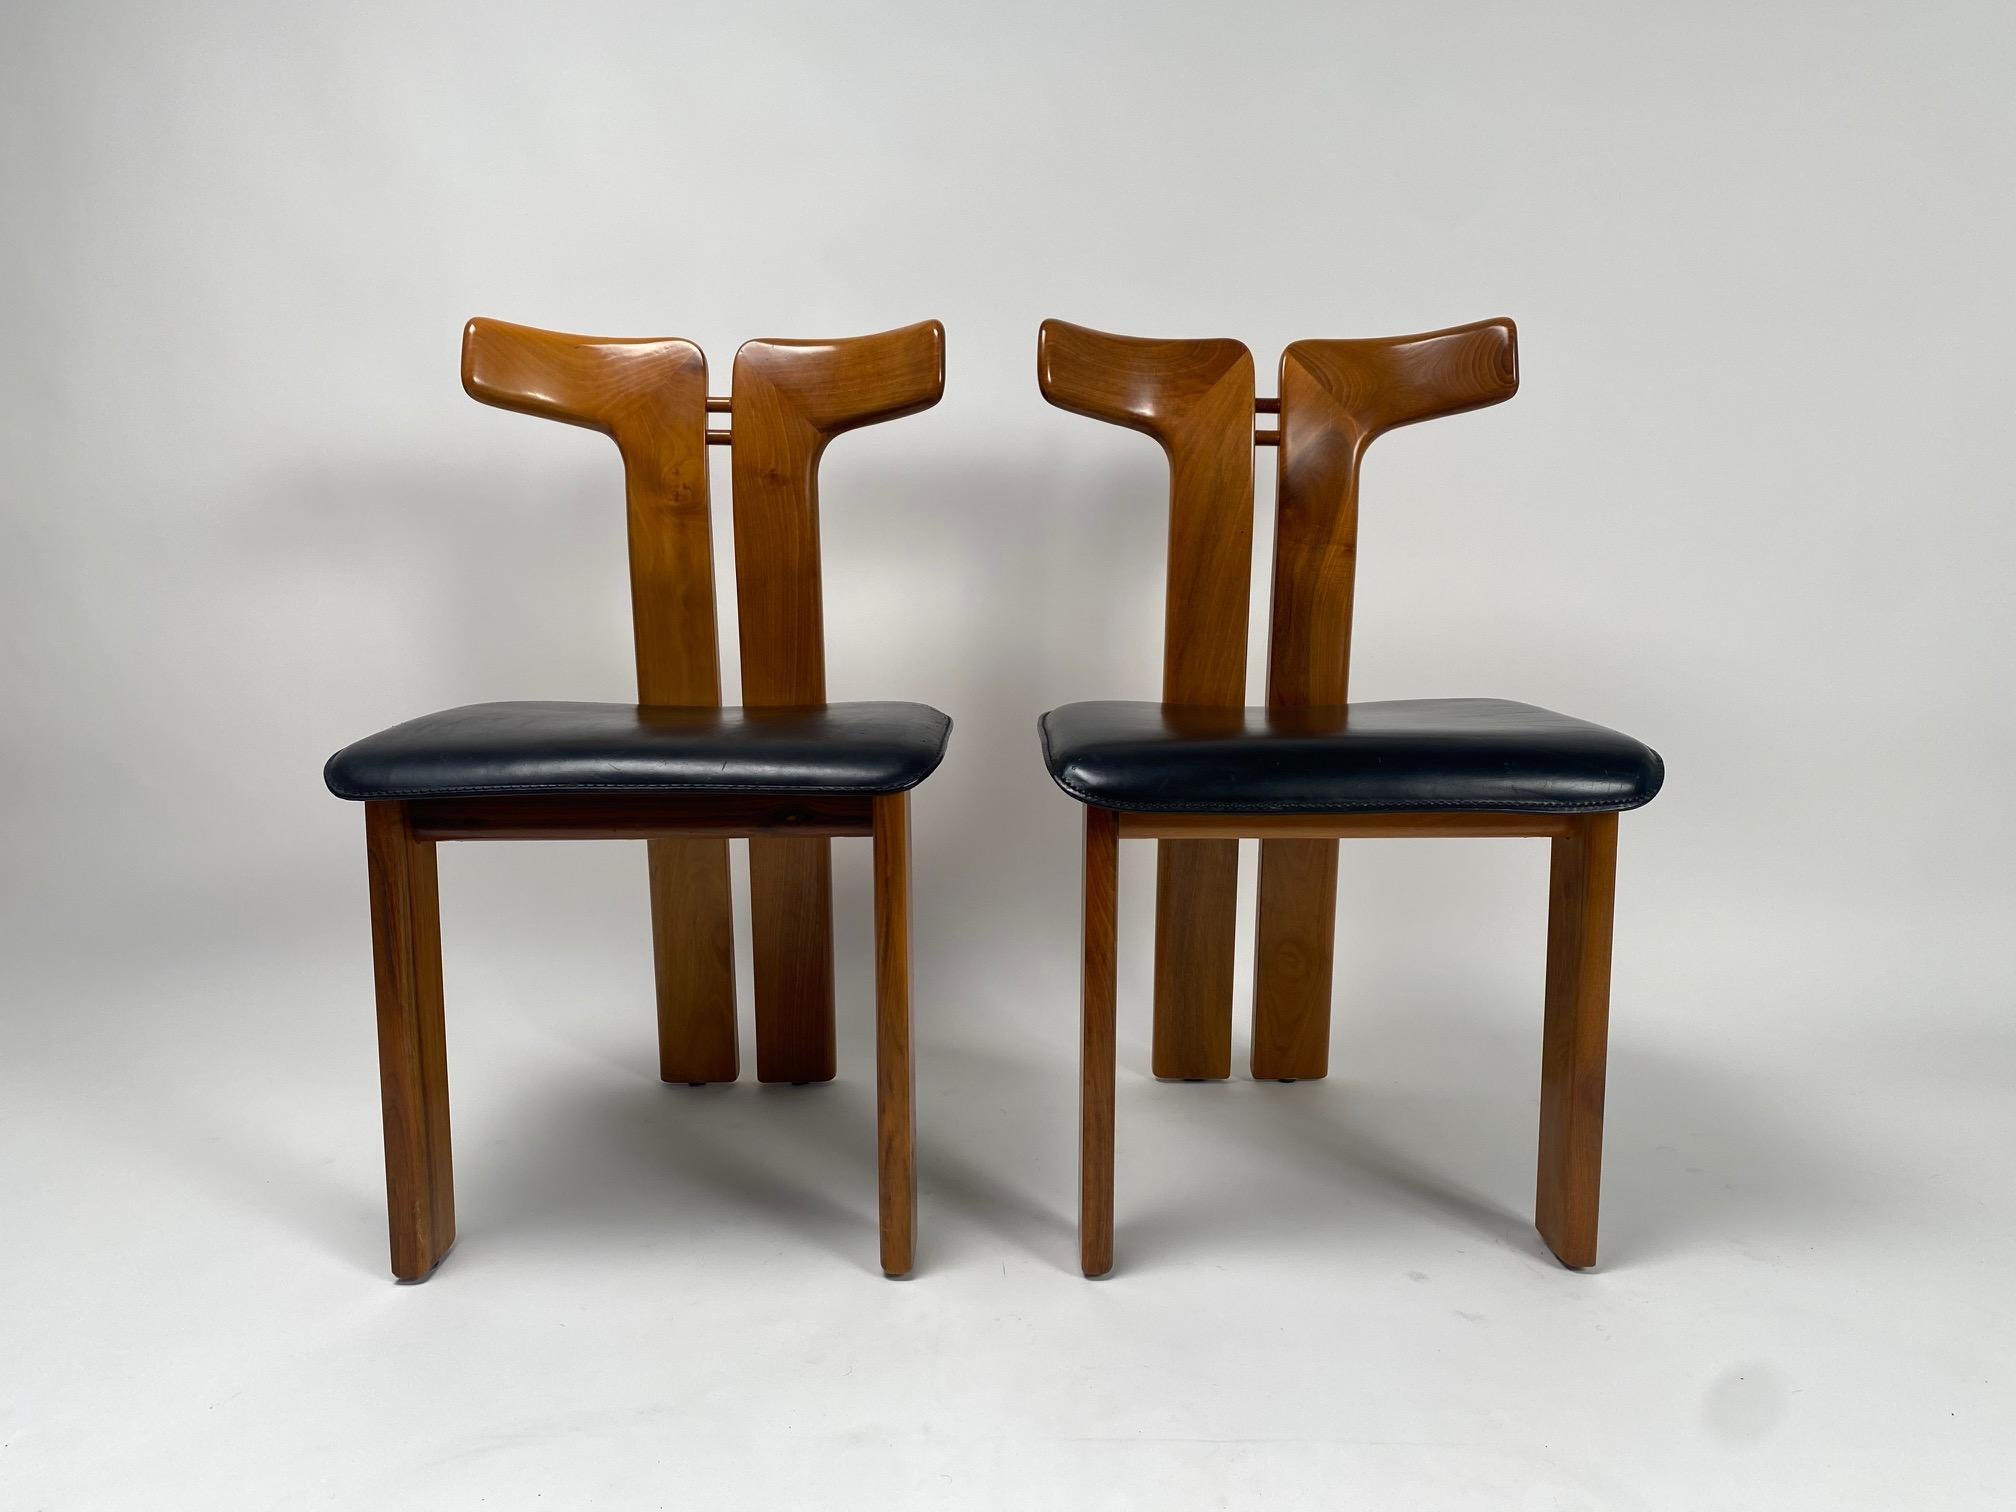 Pierre Cardin, 6 Dining Chairs in Walnut and Leather, 1970s For Sale 4